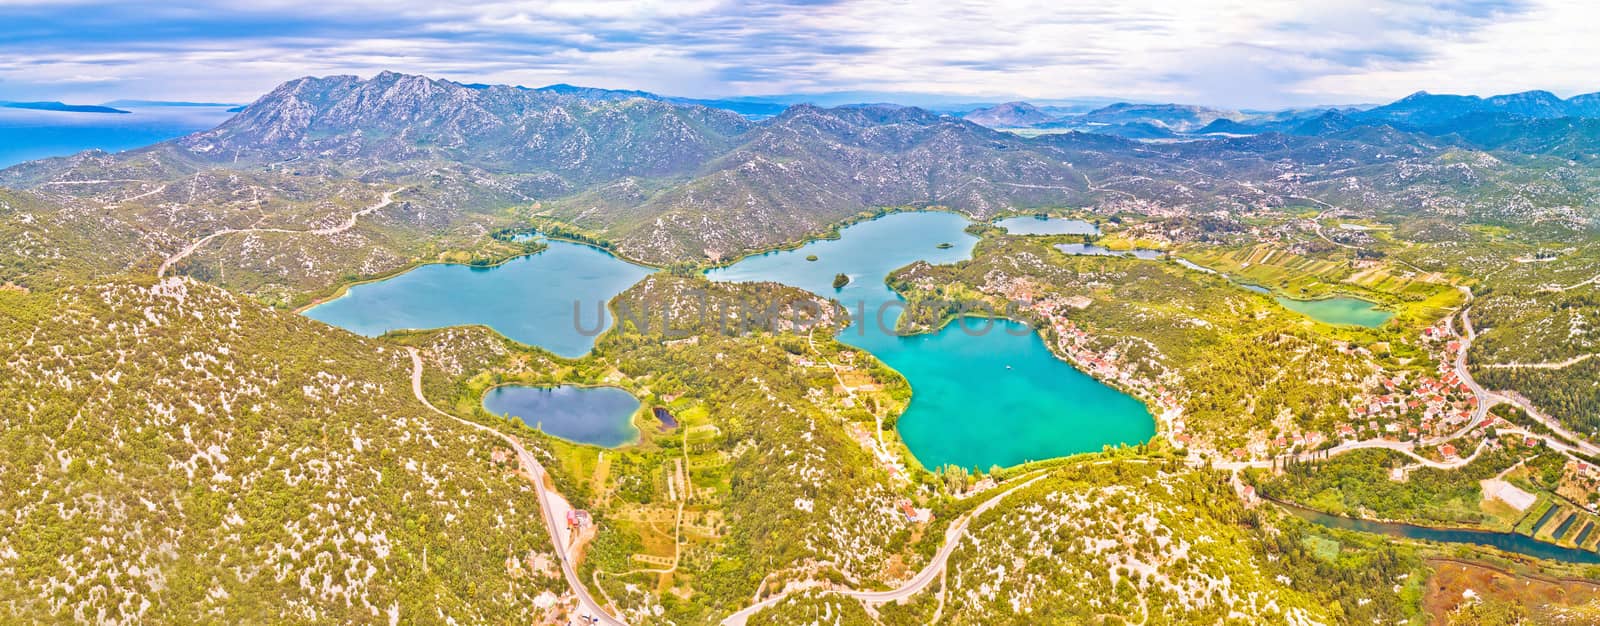 Bacina lakes landscape aerial panoramic view by xbrchx